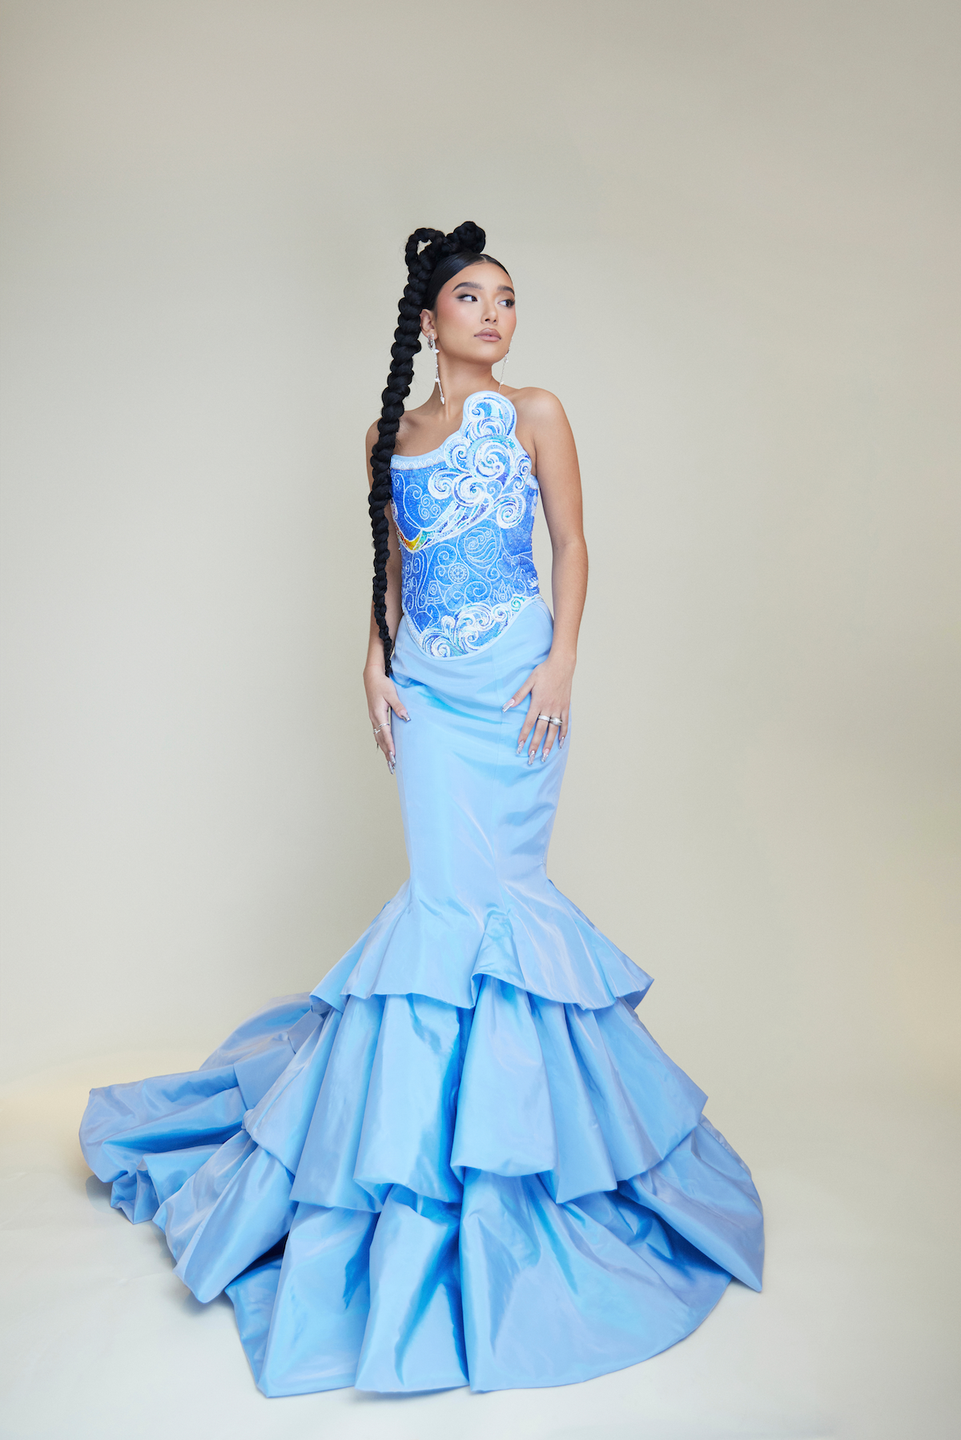 actress kiawentiio posing in a blue mermaid gown with her eyes looking off camera